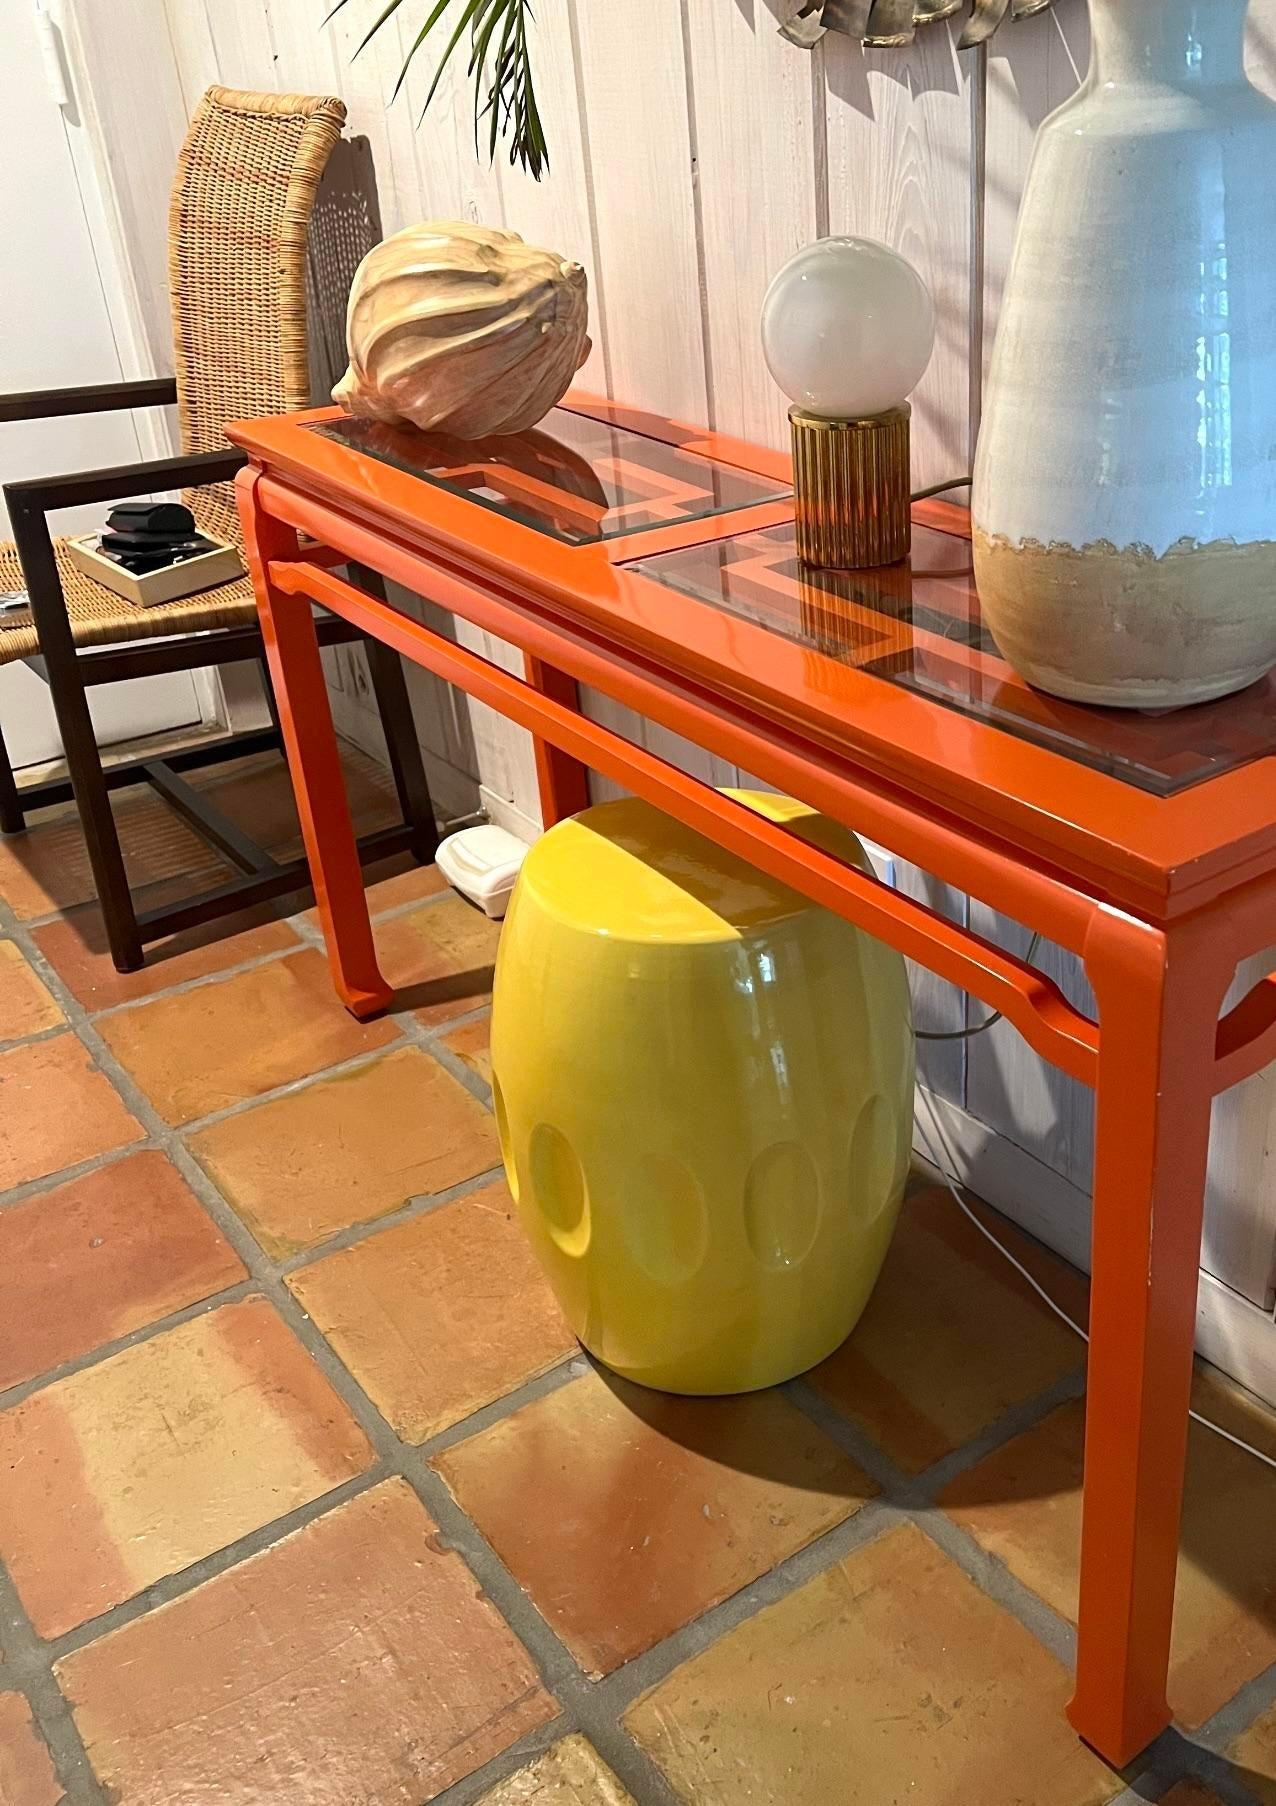 A stunning vintage Regency console table. A chic brilliant orange lacquer Finnish on a classic fretwork design. Inset glass top. Acquired from a Palm Beach estate.